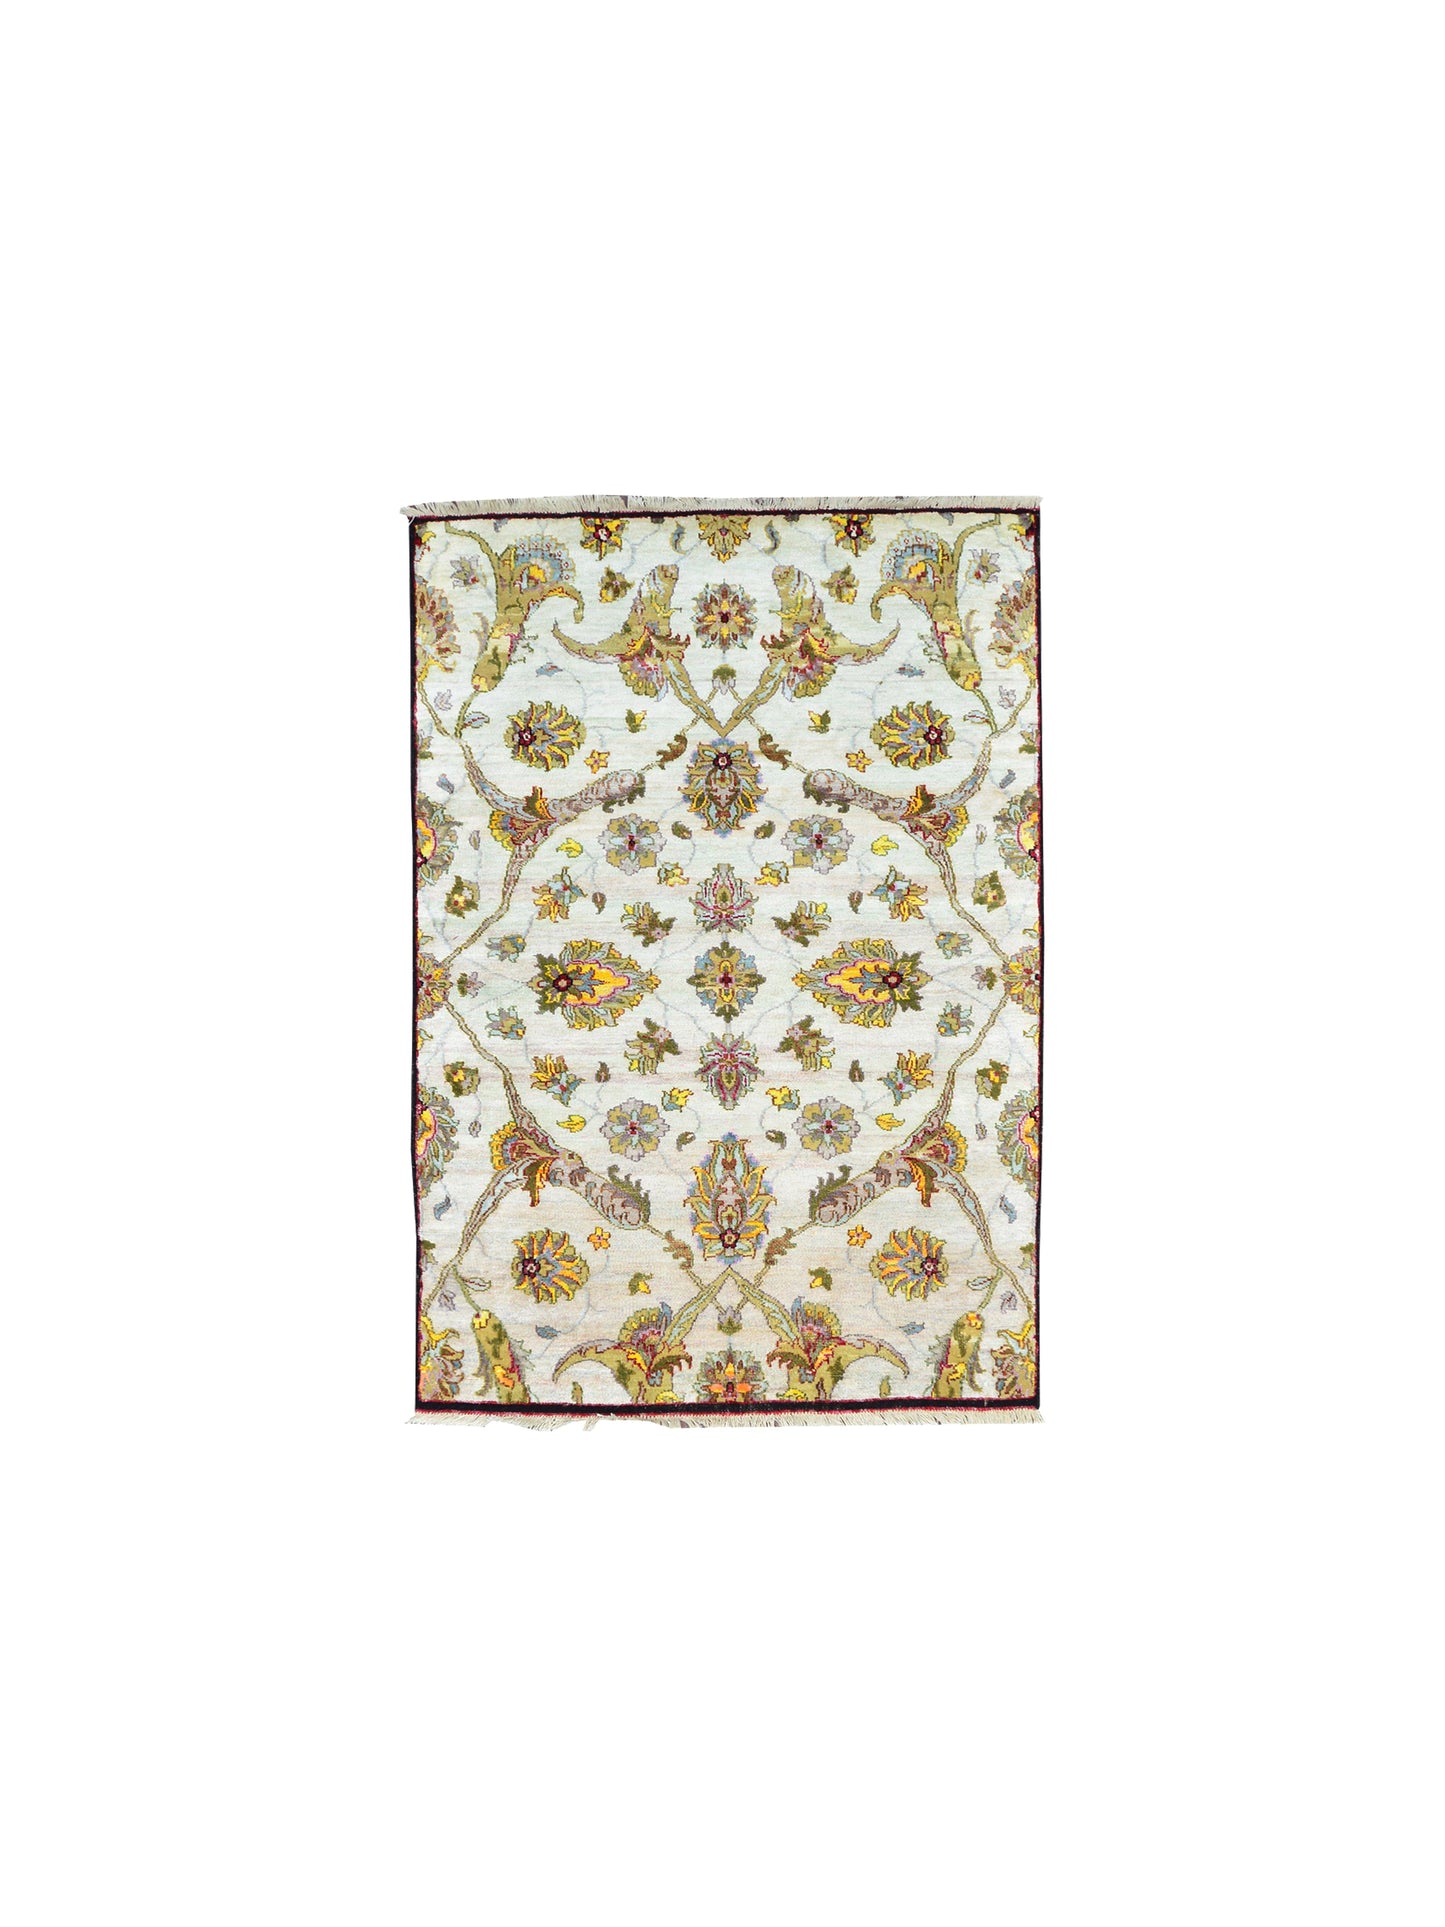 Get trendy with Ivory Multi Pure Silk Contemporary Handknotted Area Rug 3.11x6.0ft 119x183Cms - Contemporary Rugs available at Jaipur Oriental Rugs. Grab yours for $1690.00 today!